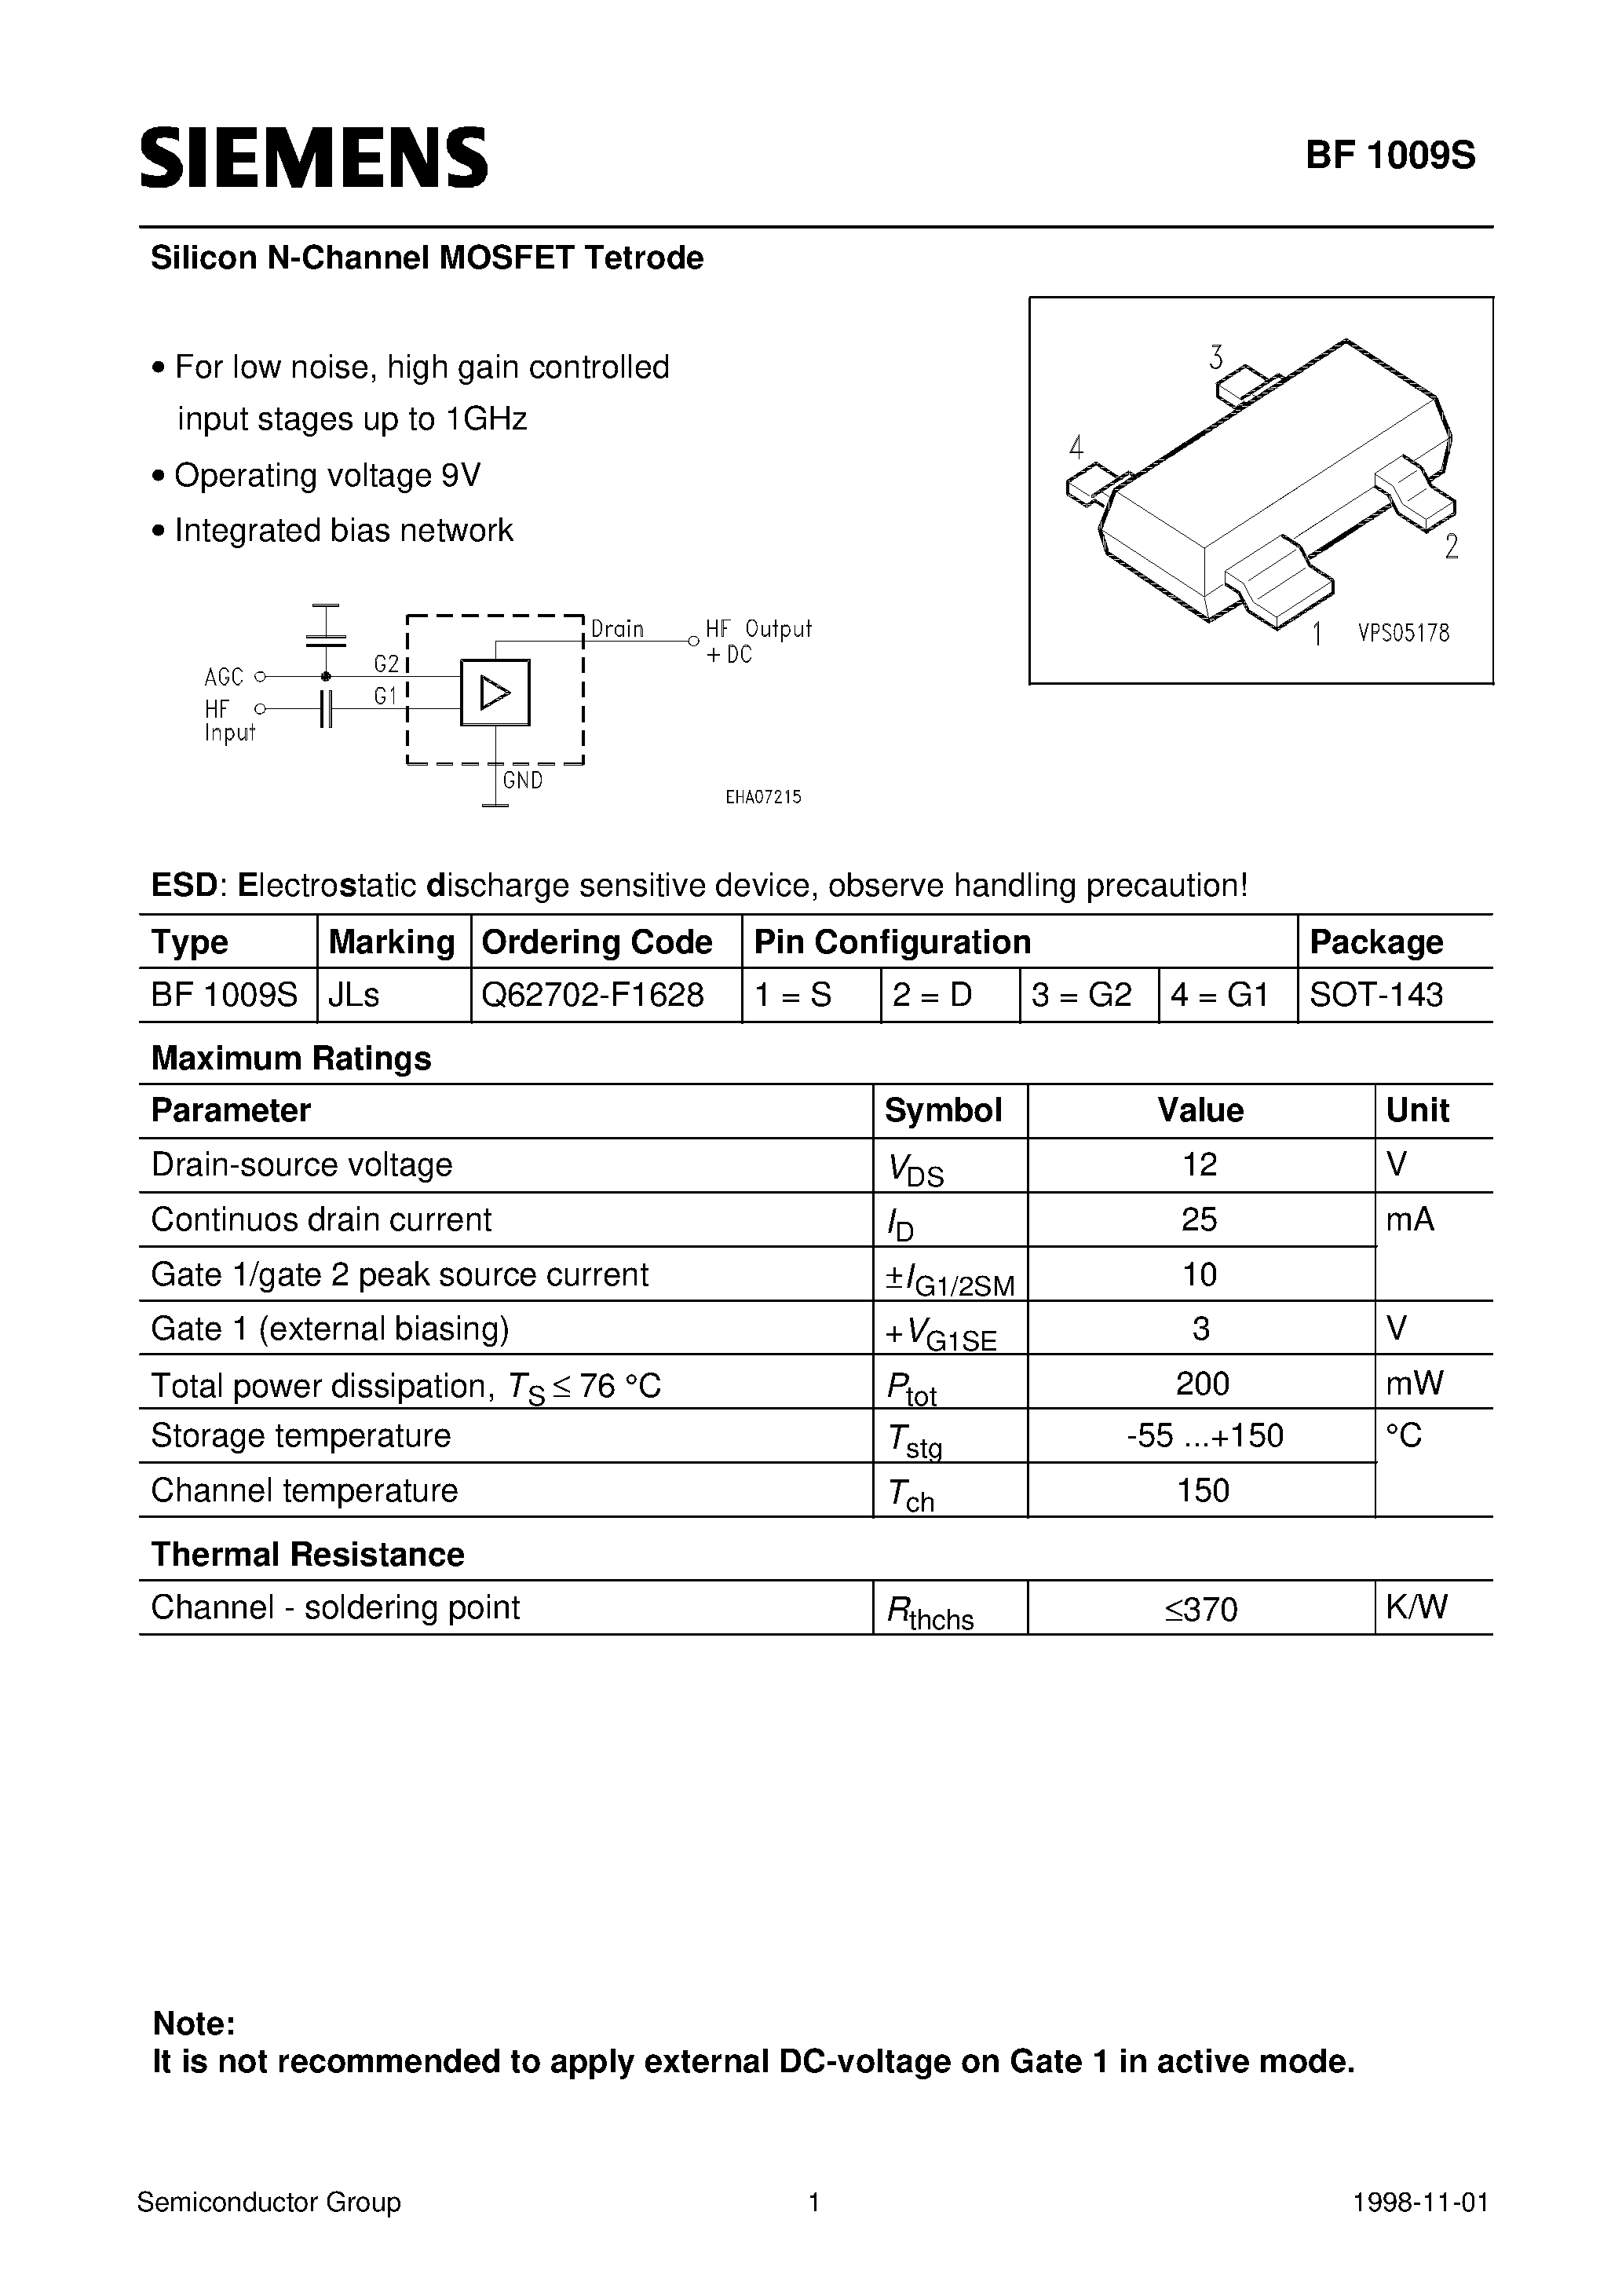 Datasheet BF1009S - Silicon N-Channel MOSFET Tetrode (For low noise/ high gain controlled input stages up to 1GHz Operating voltage 9V Integrated bias network) page 1